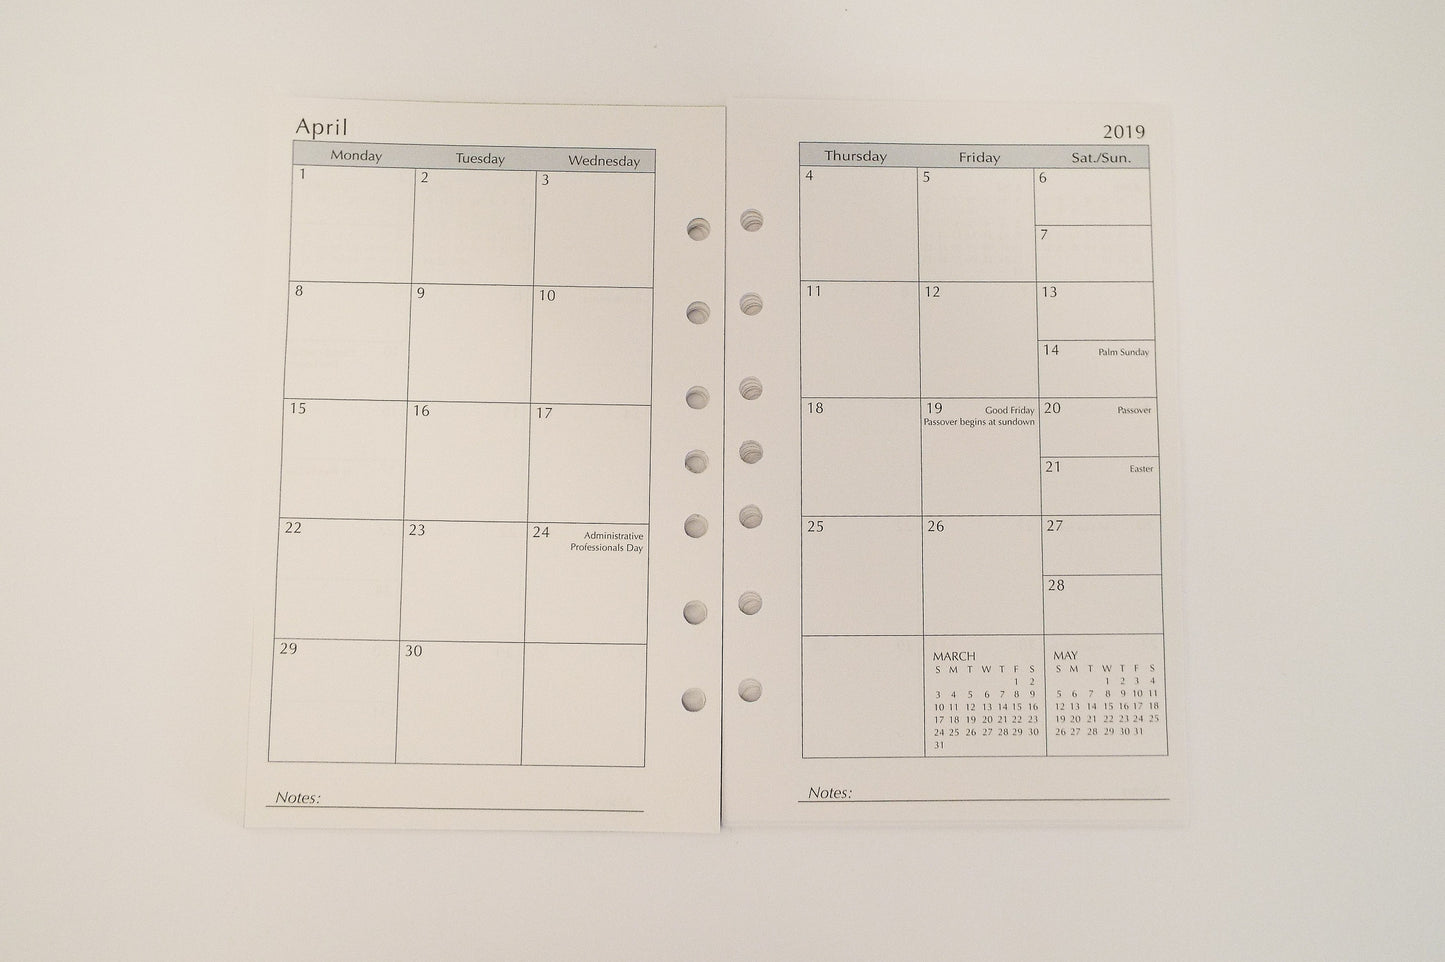 McCarthy Planner- Item MW58P7 12 Month Planner and Address Refill Combo  White paper. 8-1/2 x 5-1/2 7 hole. Weekly and Monthly View Format. One planner; with two formats. Also includes Area Codes and Time Zone Map, Important Dates, International Holidays, and Toll-Free Numbers and Web Sites! 48 sheets (96 pages) supplemental section included. The supplemental section has 20 ruled, 24 to-do and 54 address pages.  Made in the USA!